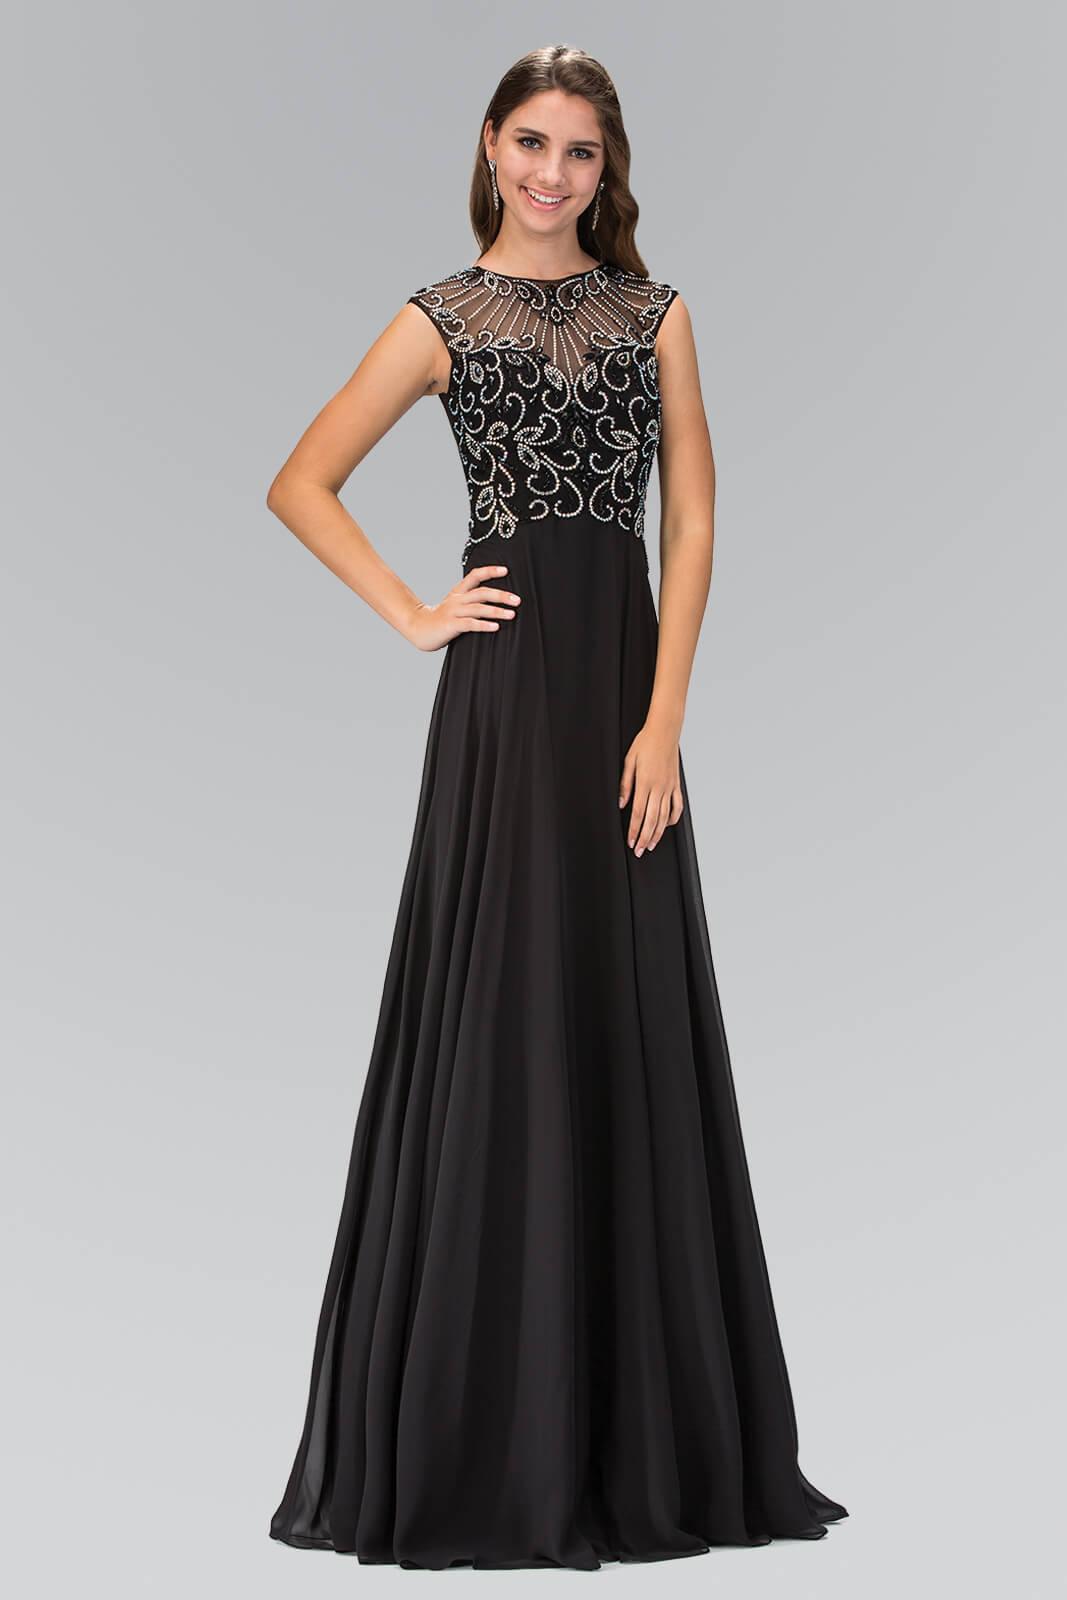 Prom Long Formal Beaded Bodice Evening Gown - The Dress Outlet Elizabeth K